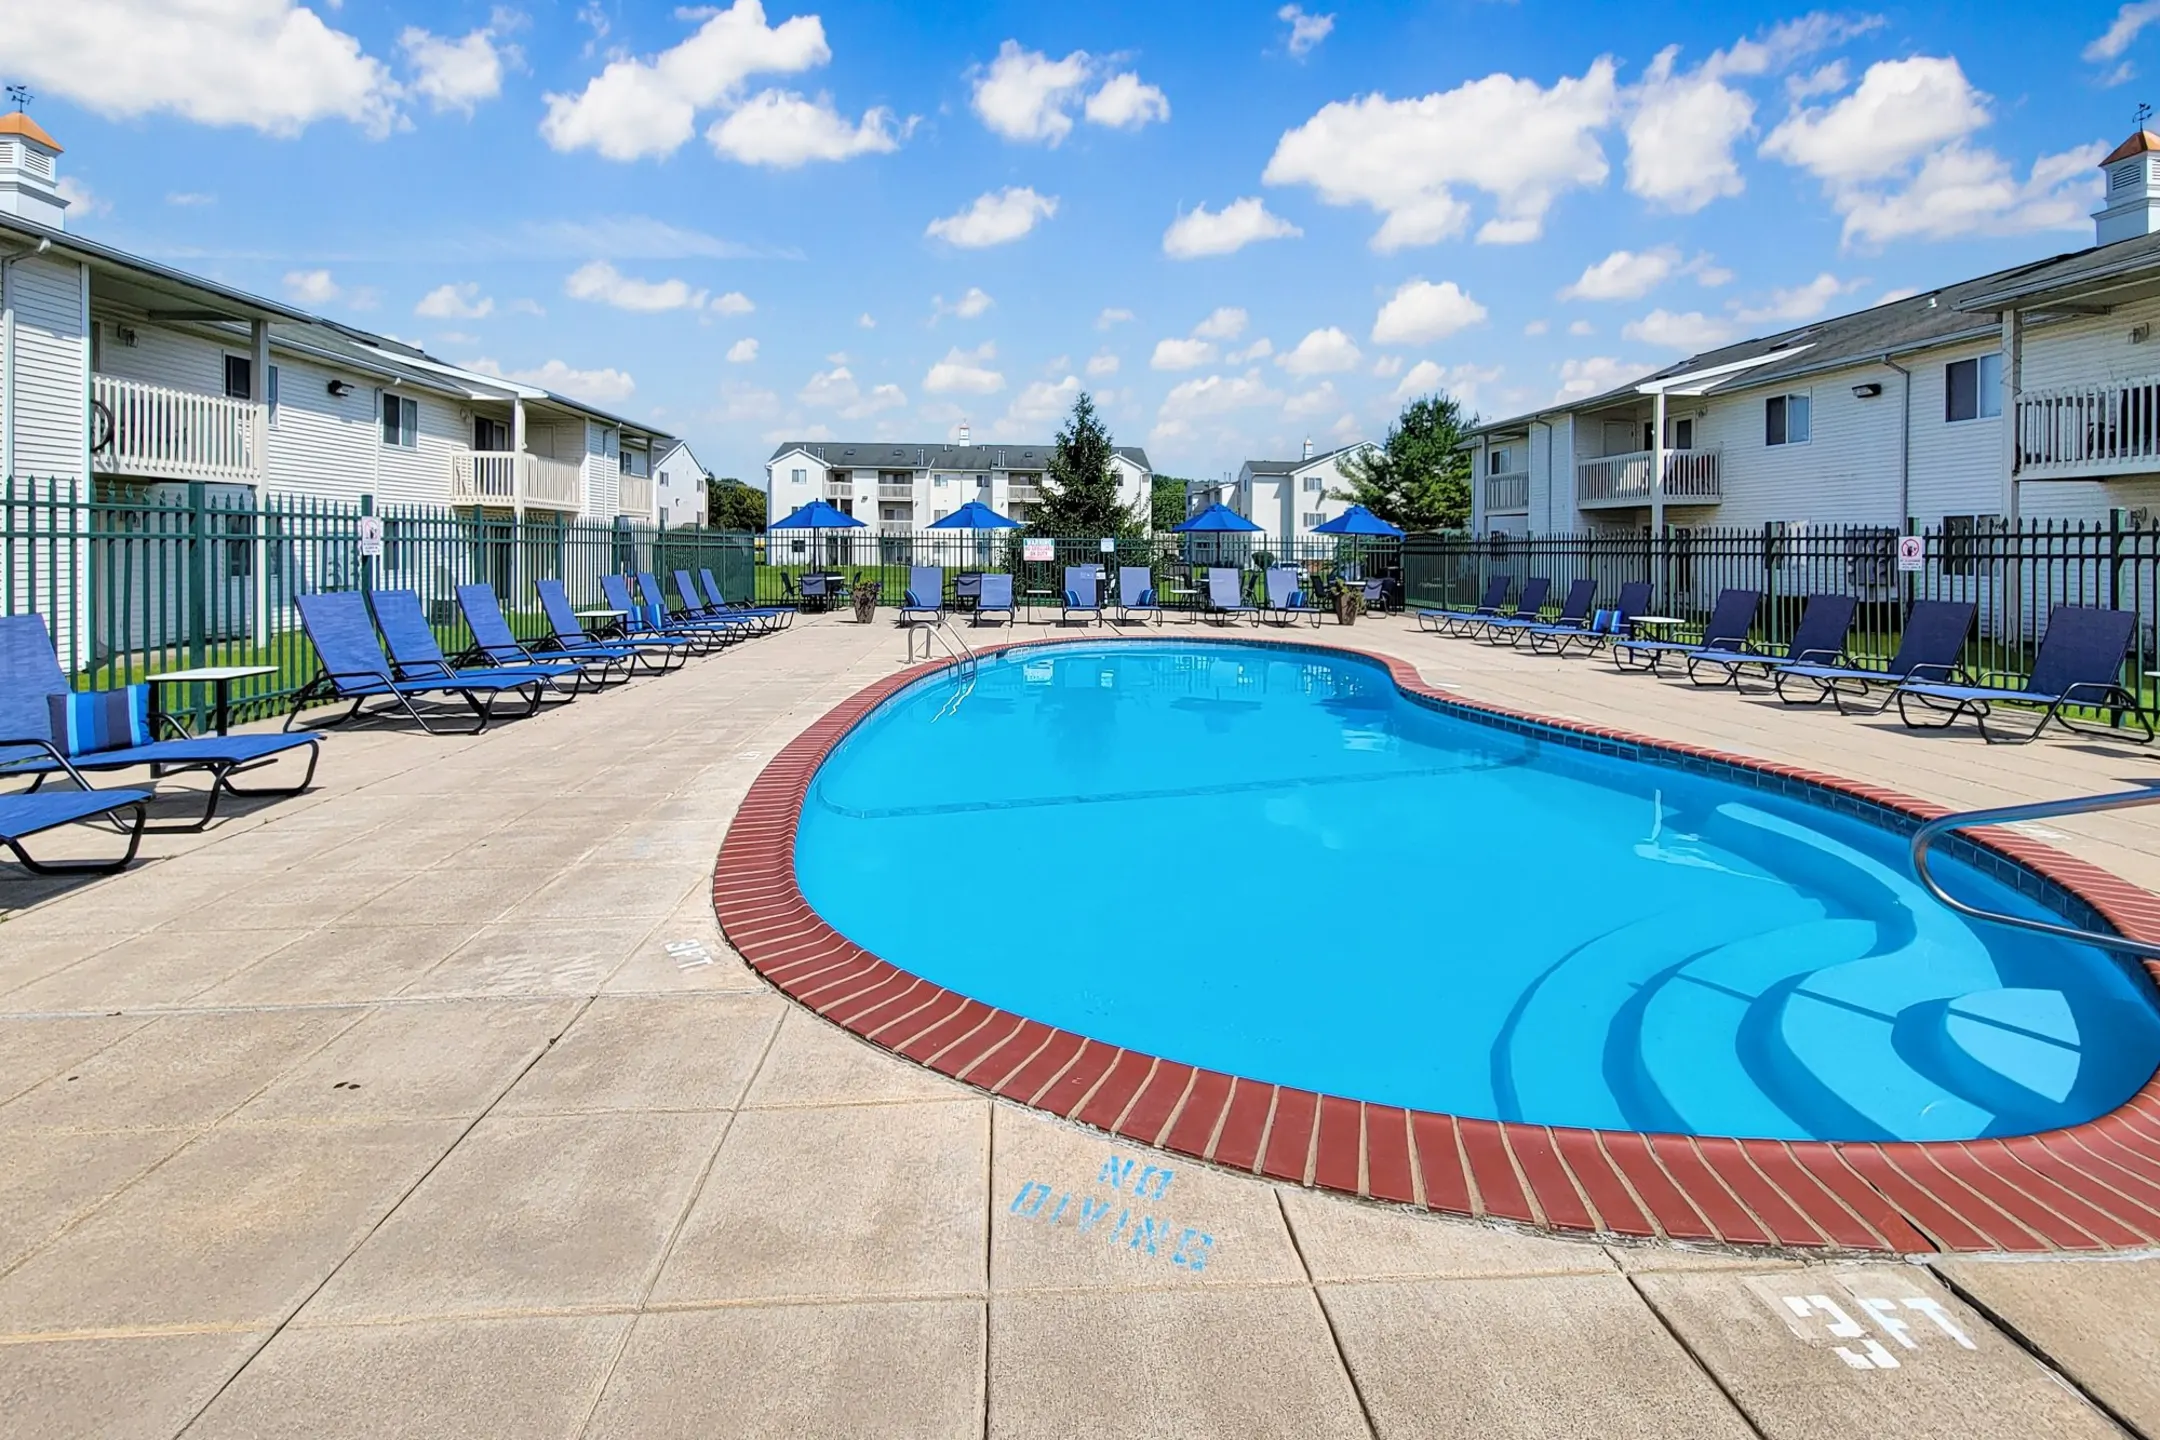 Steeplechase Apartments & Townhomes - Toledo, OH